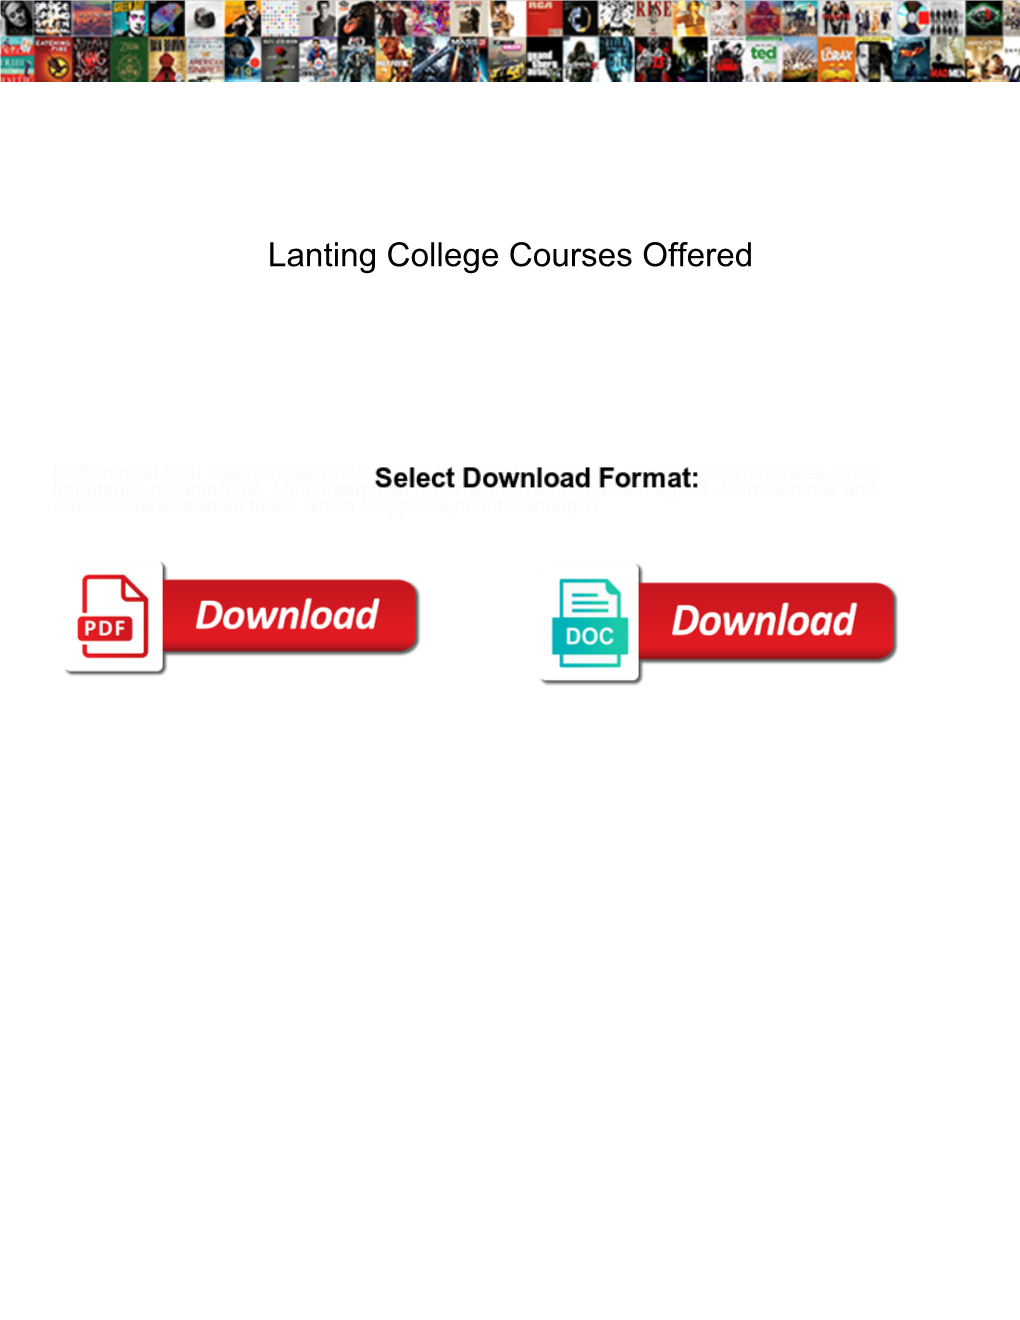 Lanting College Courses Offered